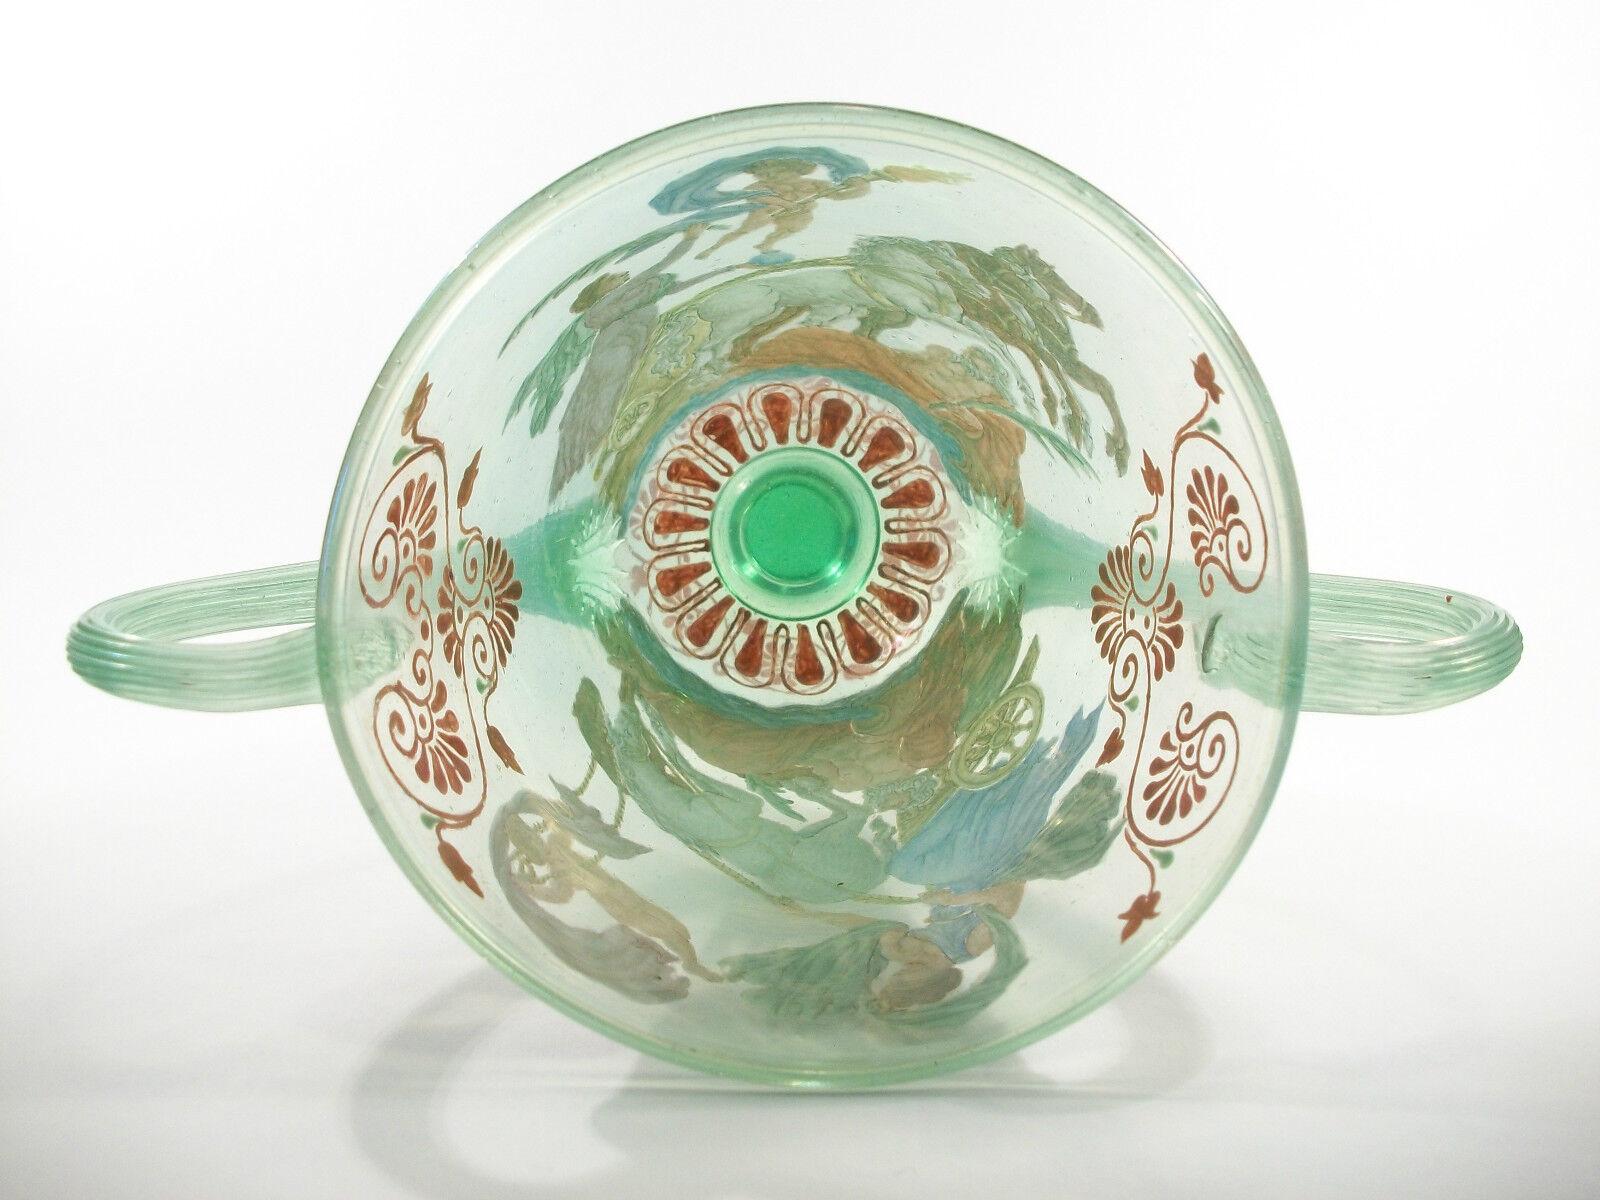 Art Glass Salviati, Antique Hand Painted Venetian Glass Urn, Italy, Early 20th Century For Sale